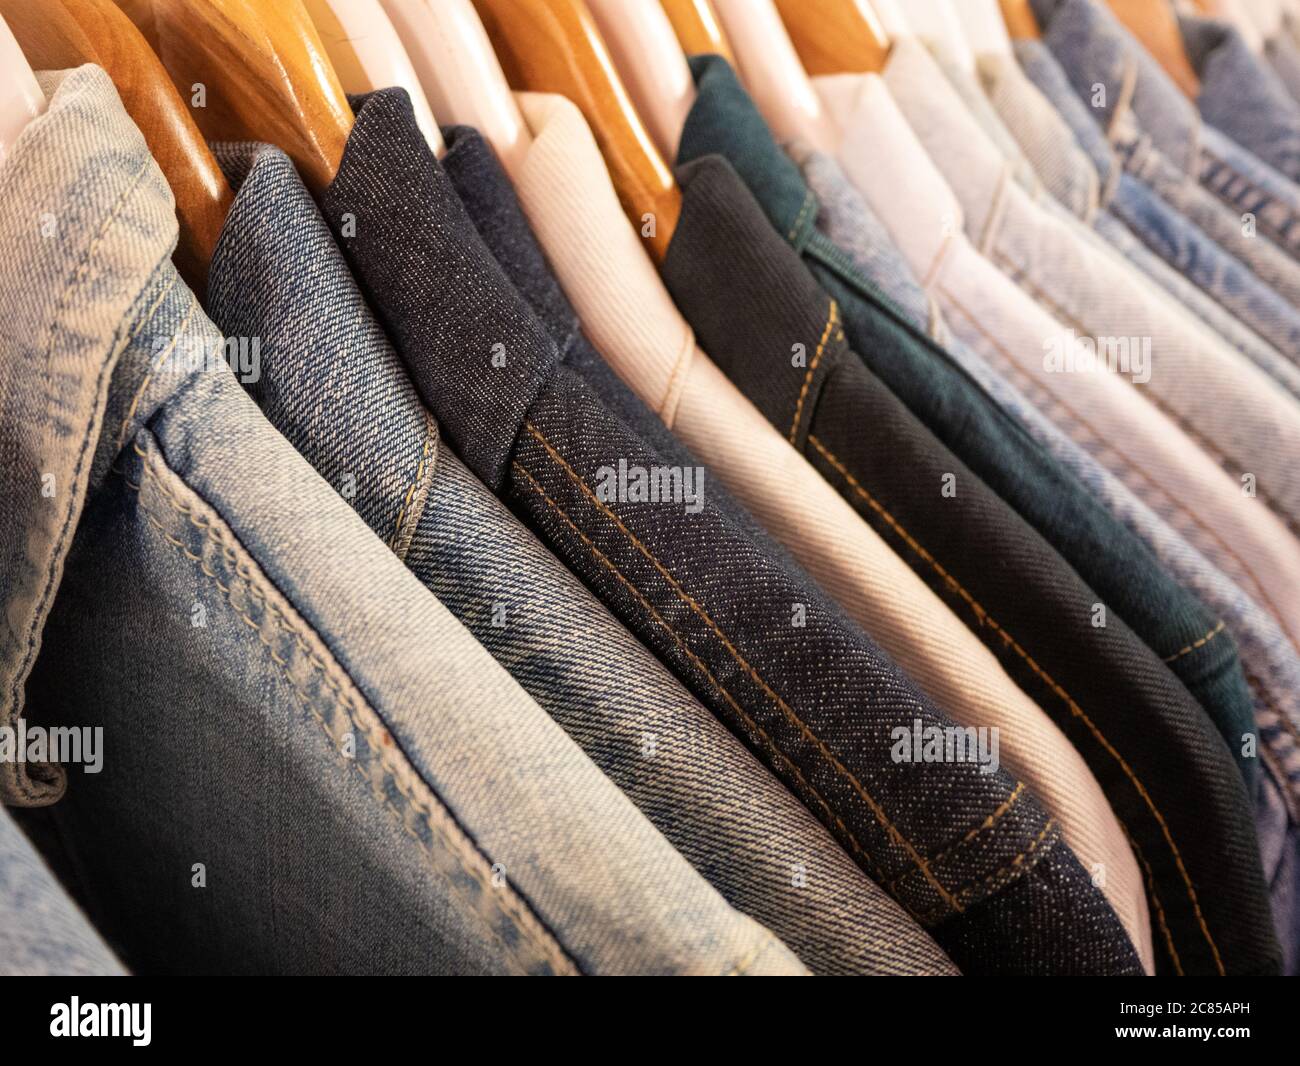 https://c8.alamy.com/comp/2C85APH/a-selection-of-denim-jackets-hanging-on-a-rail-illustrate-the-different-tones-and-textures-of-jean-fabric-available-2C85APH.jpg